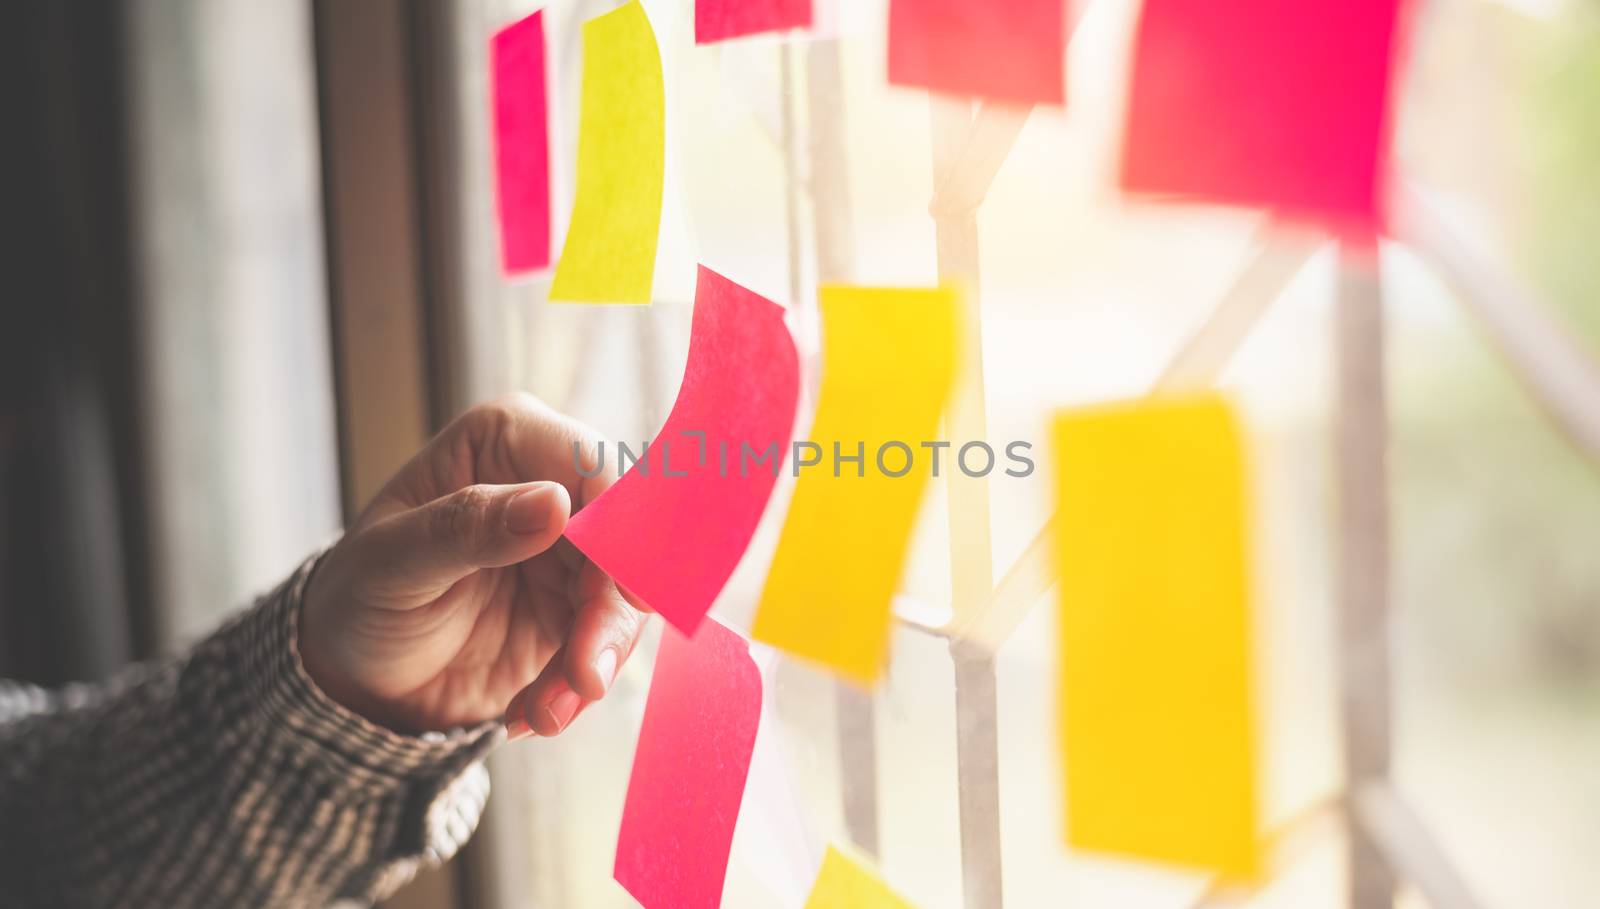 hand is holding the post it notes attached to the glass wall. Co by photobyphotoboy